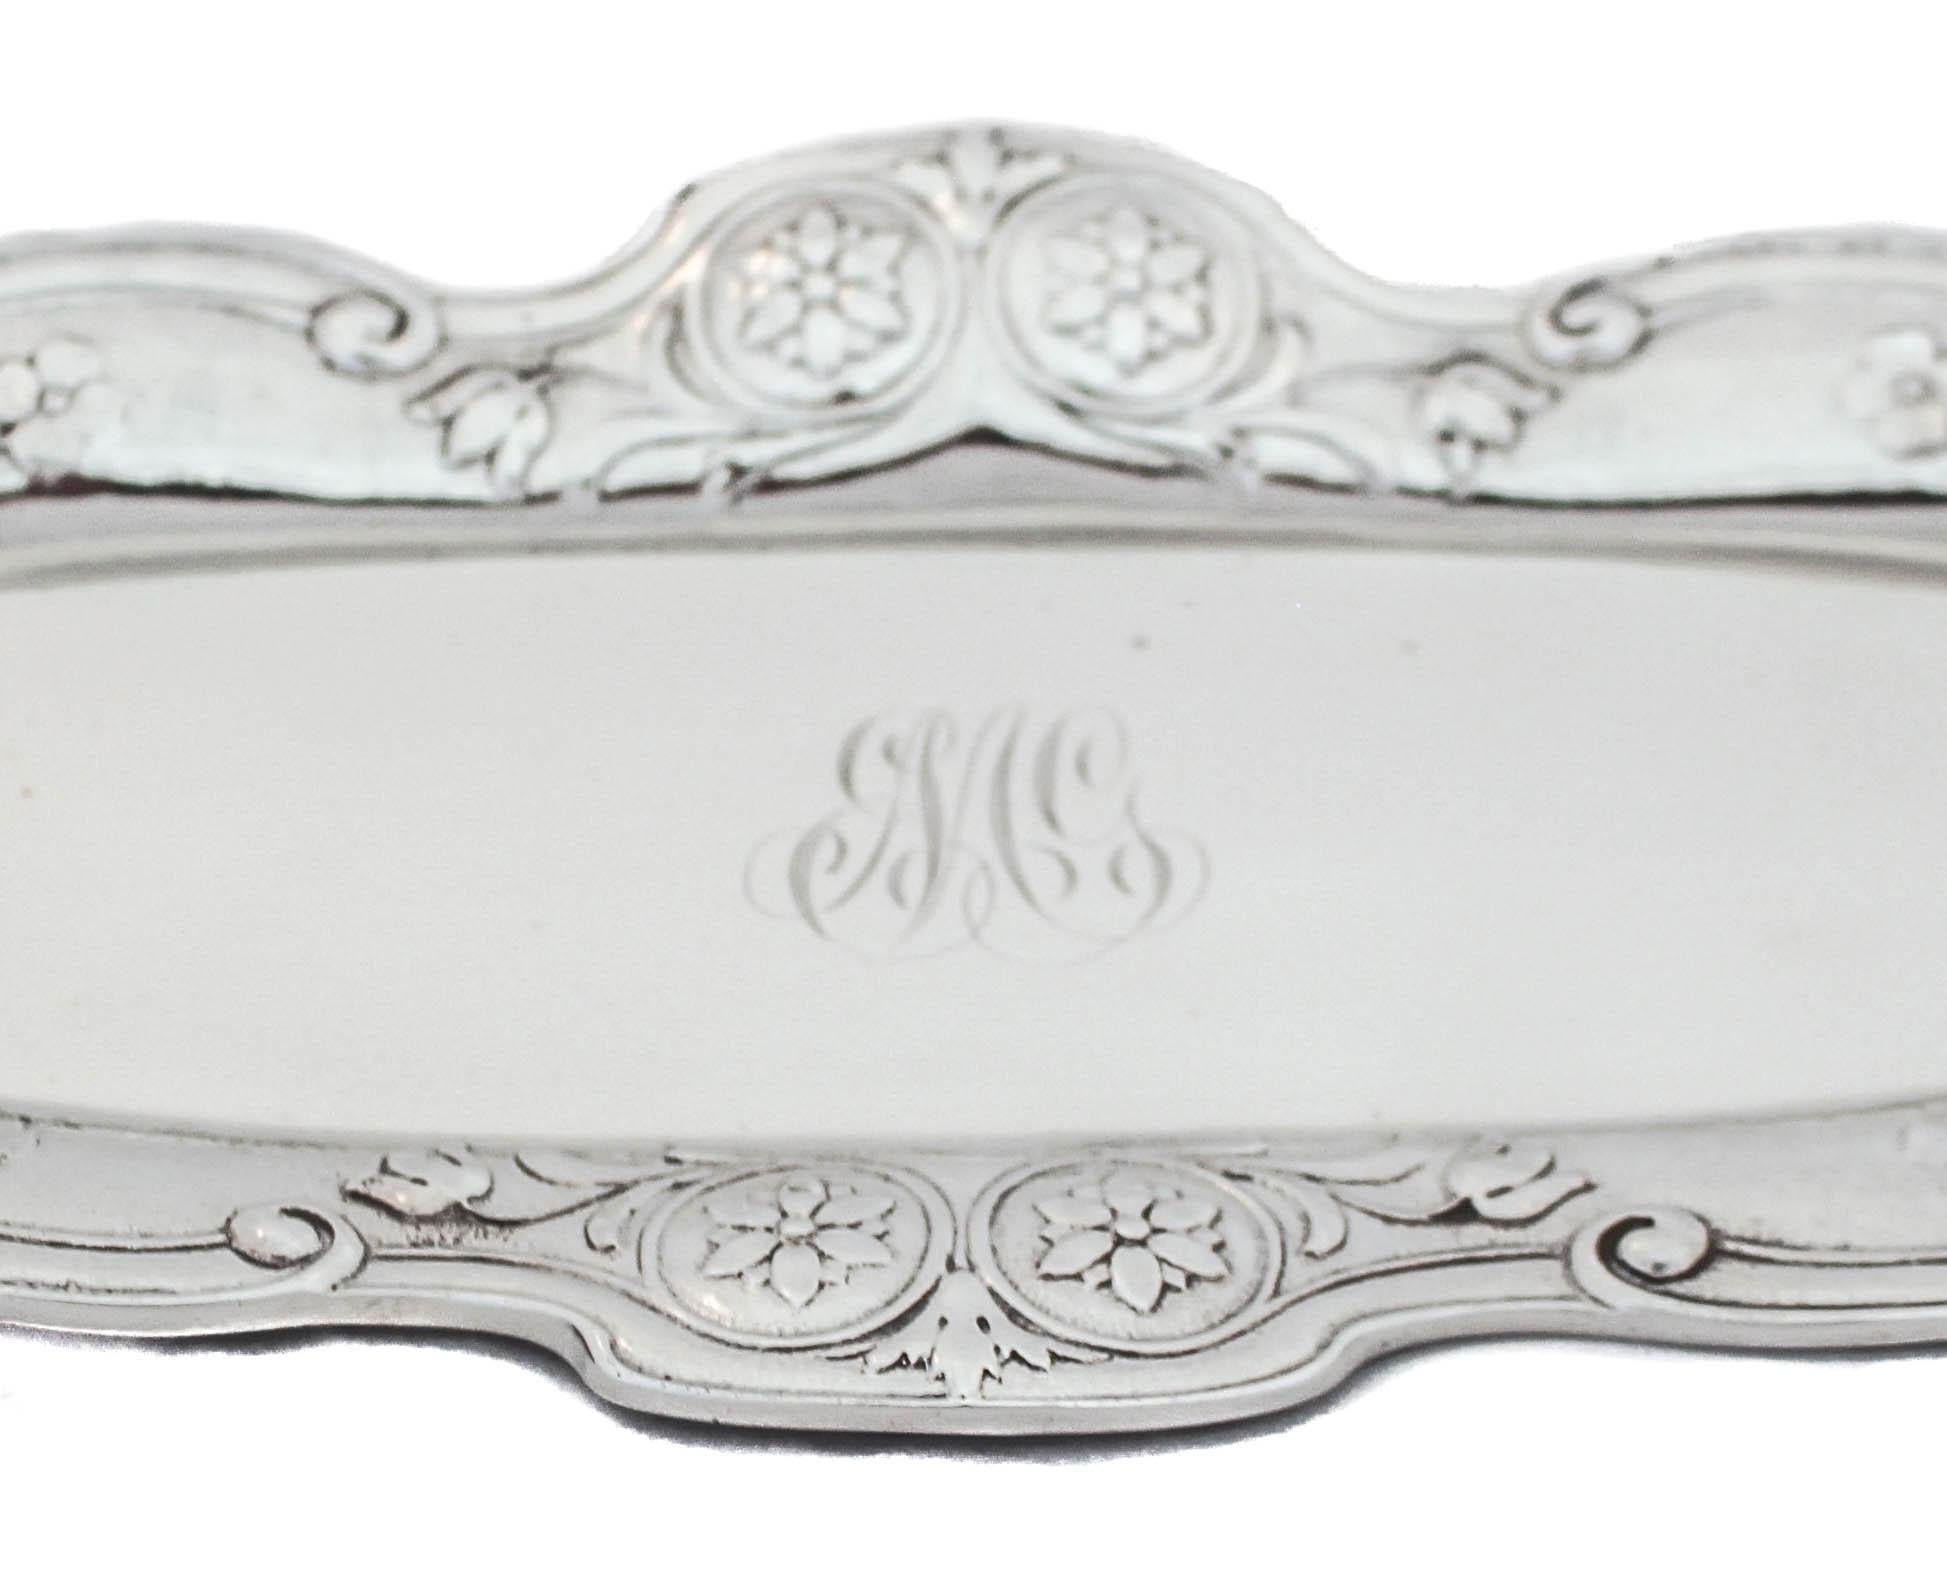 We are proud to offer this sterling silver Art Nouveau ring tray by Gorham Silversmiths of Providence, Rhode Island.  It has a scalloped rim with aesthetic work around the edge.  The edge has a matte finish which in contrast to the center that is